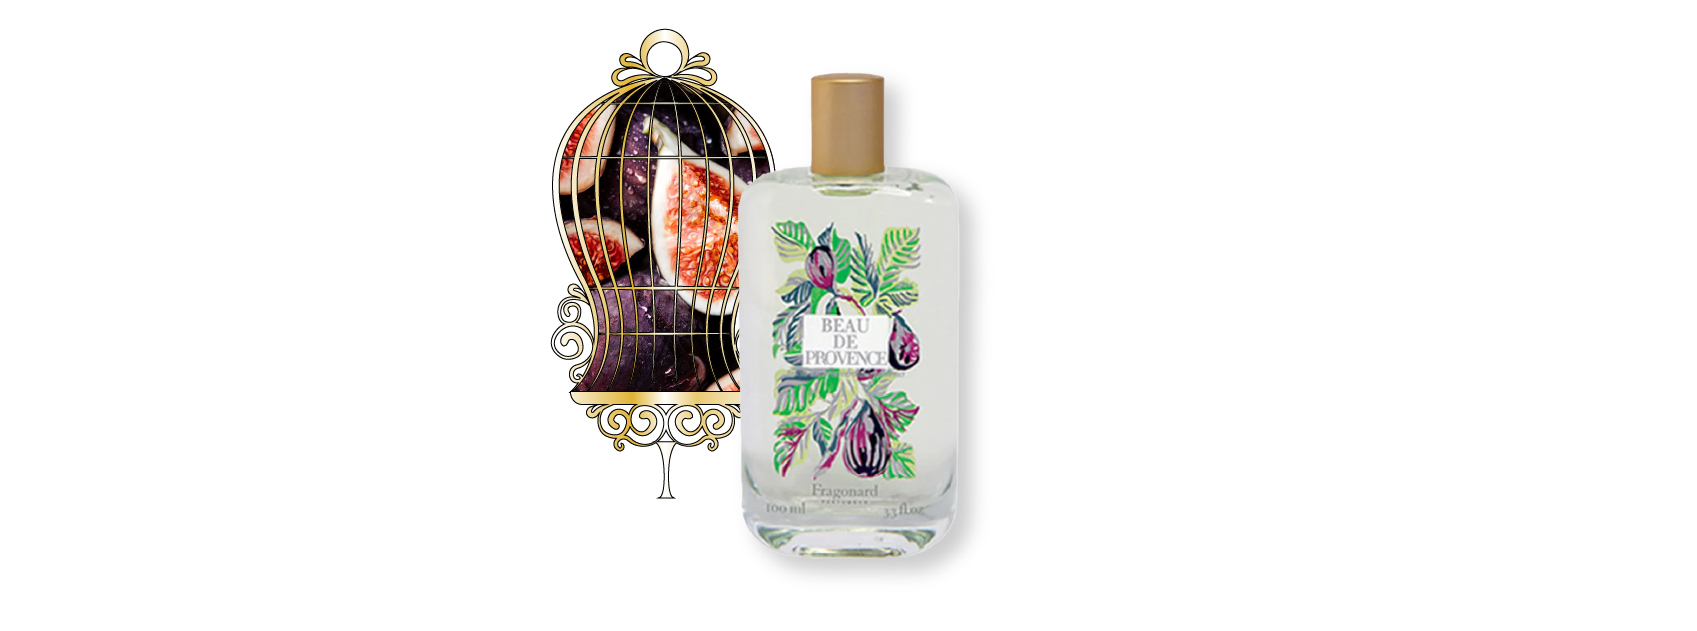 bottle of beau de provence by fragonard with a photo of figs behind a gold cage